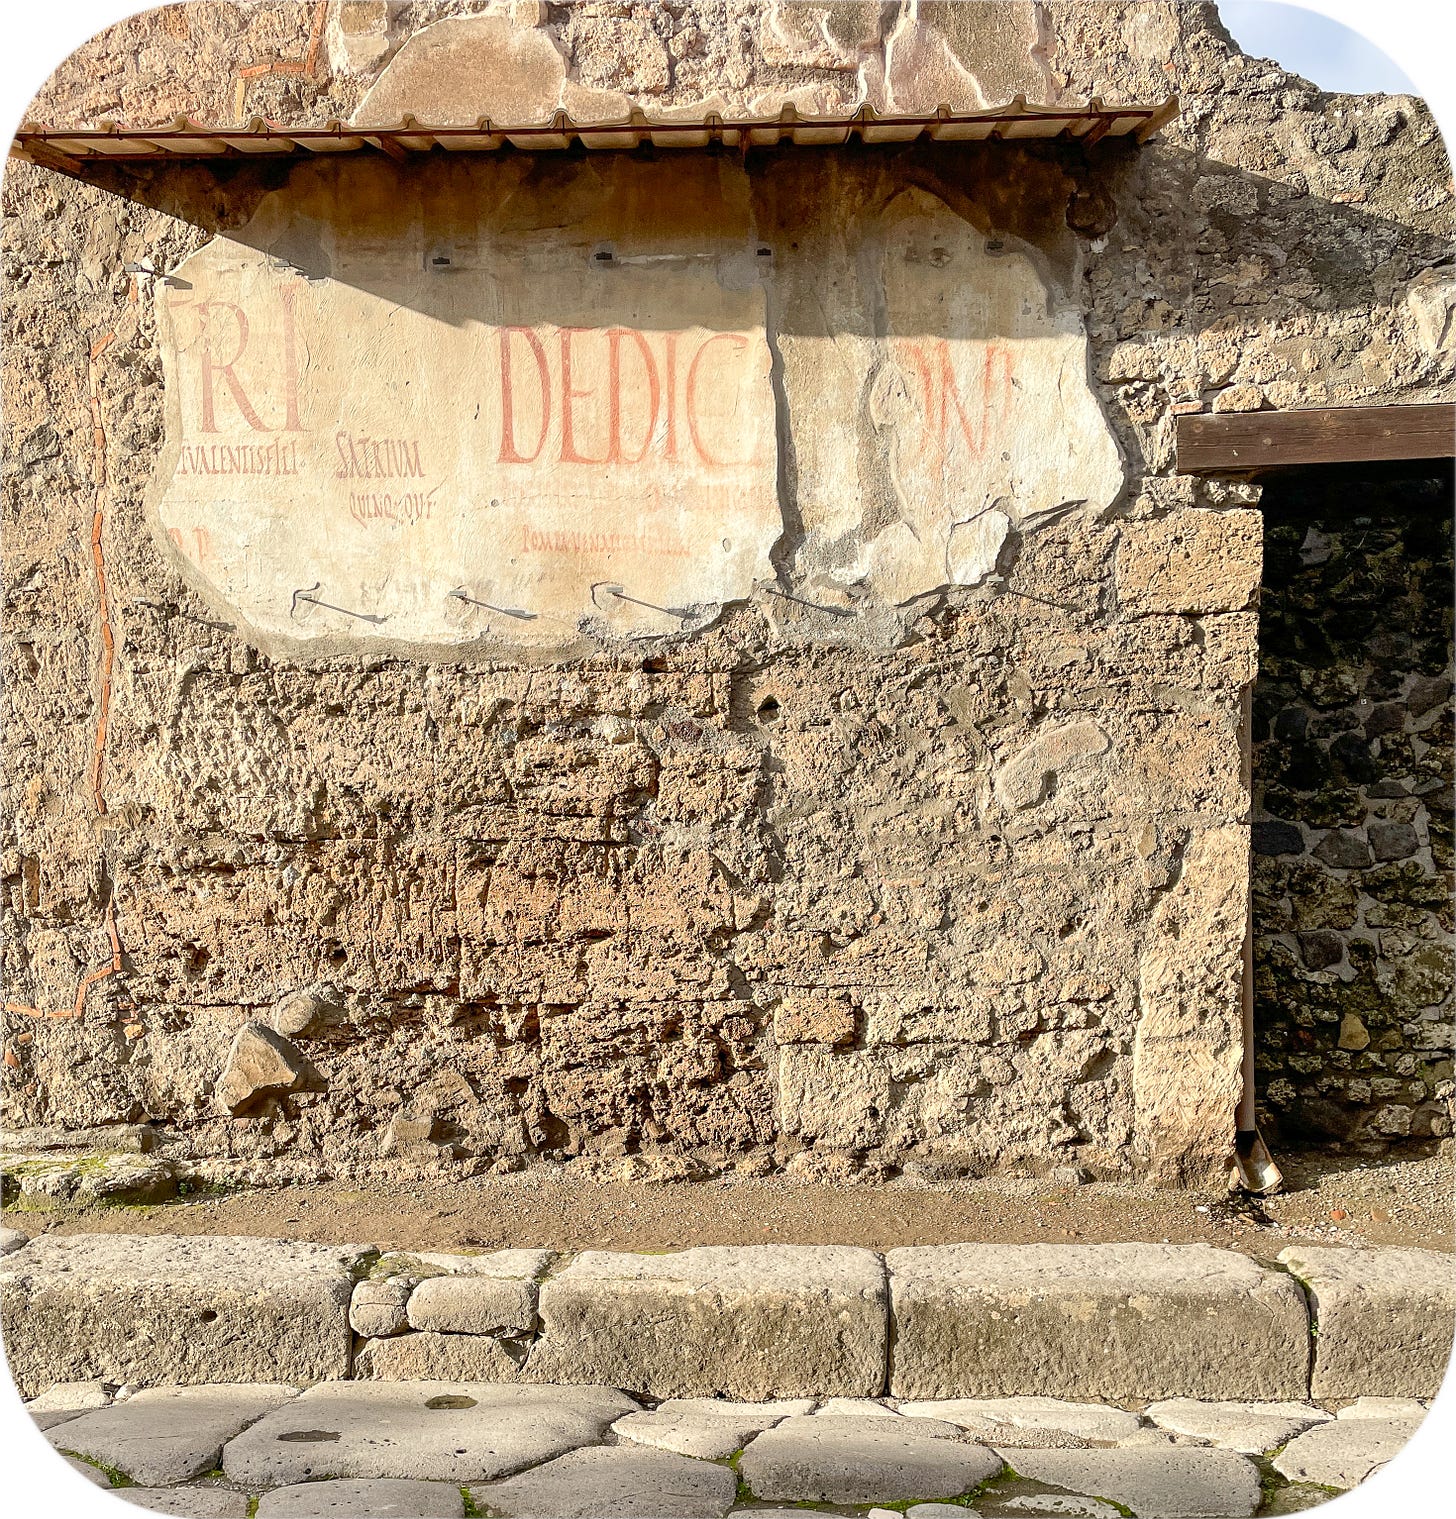 A political sign on the wall, Pompeii, Italy